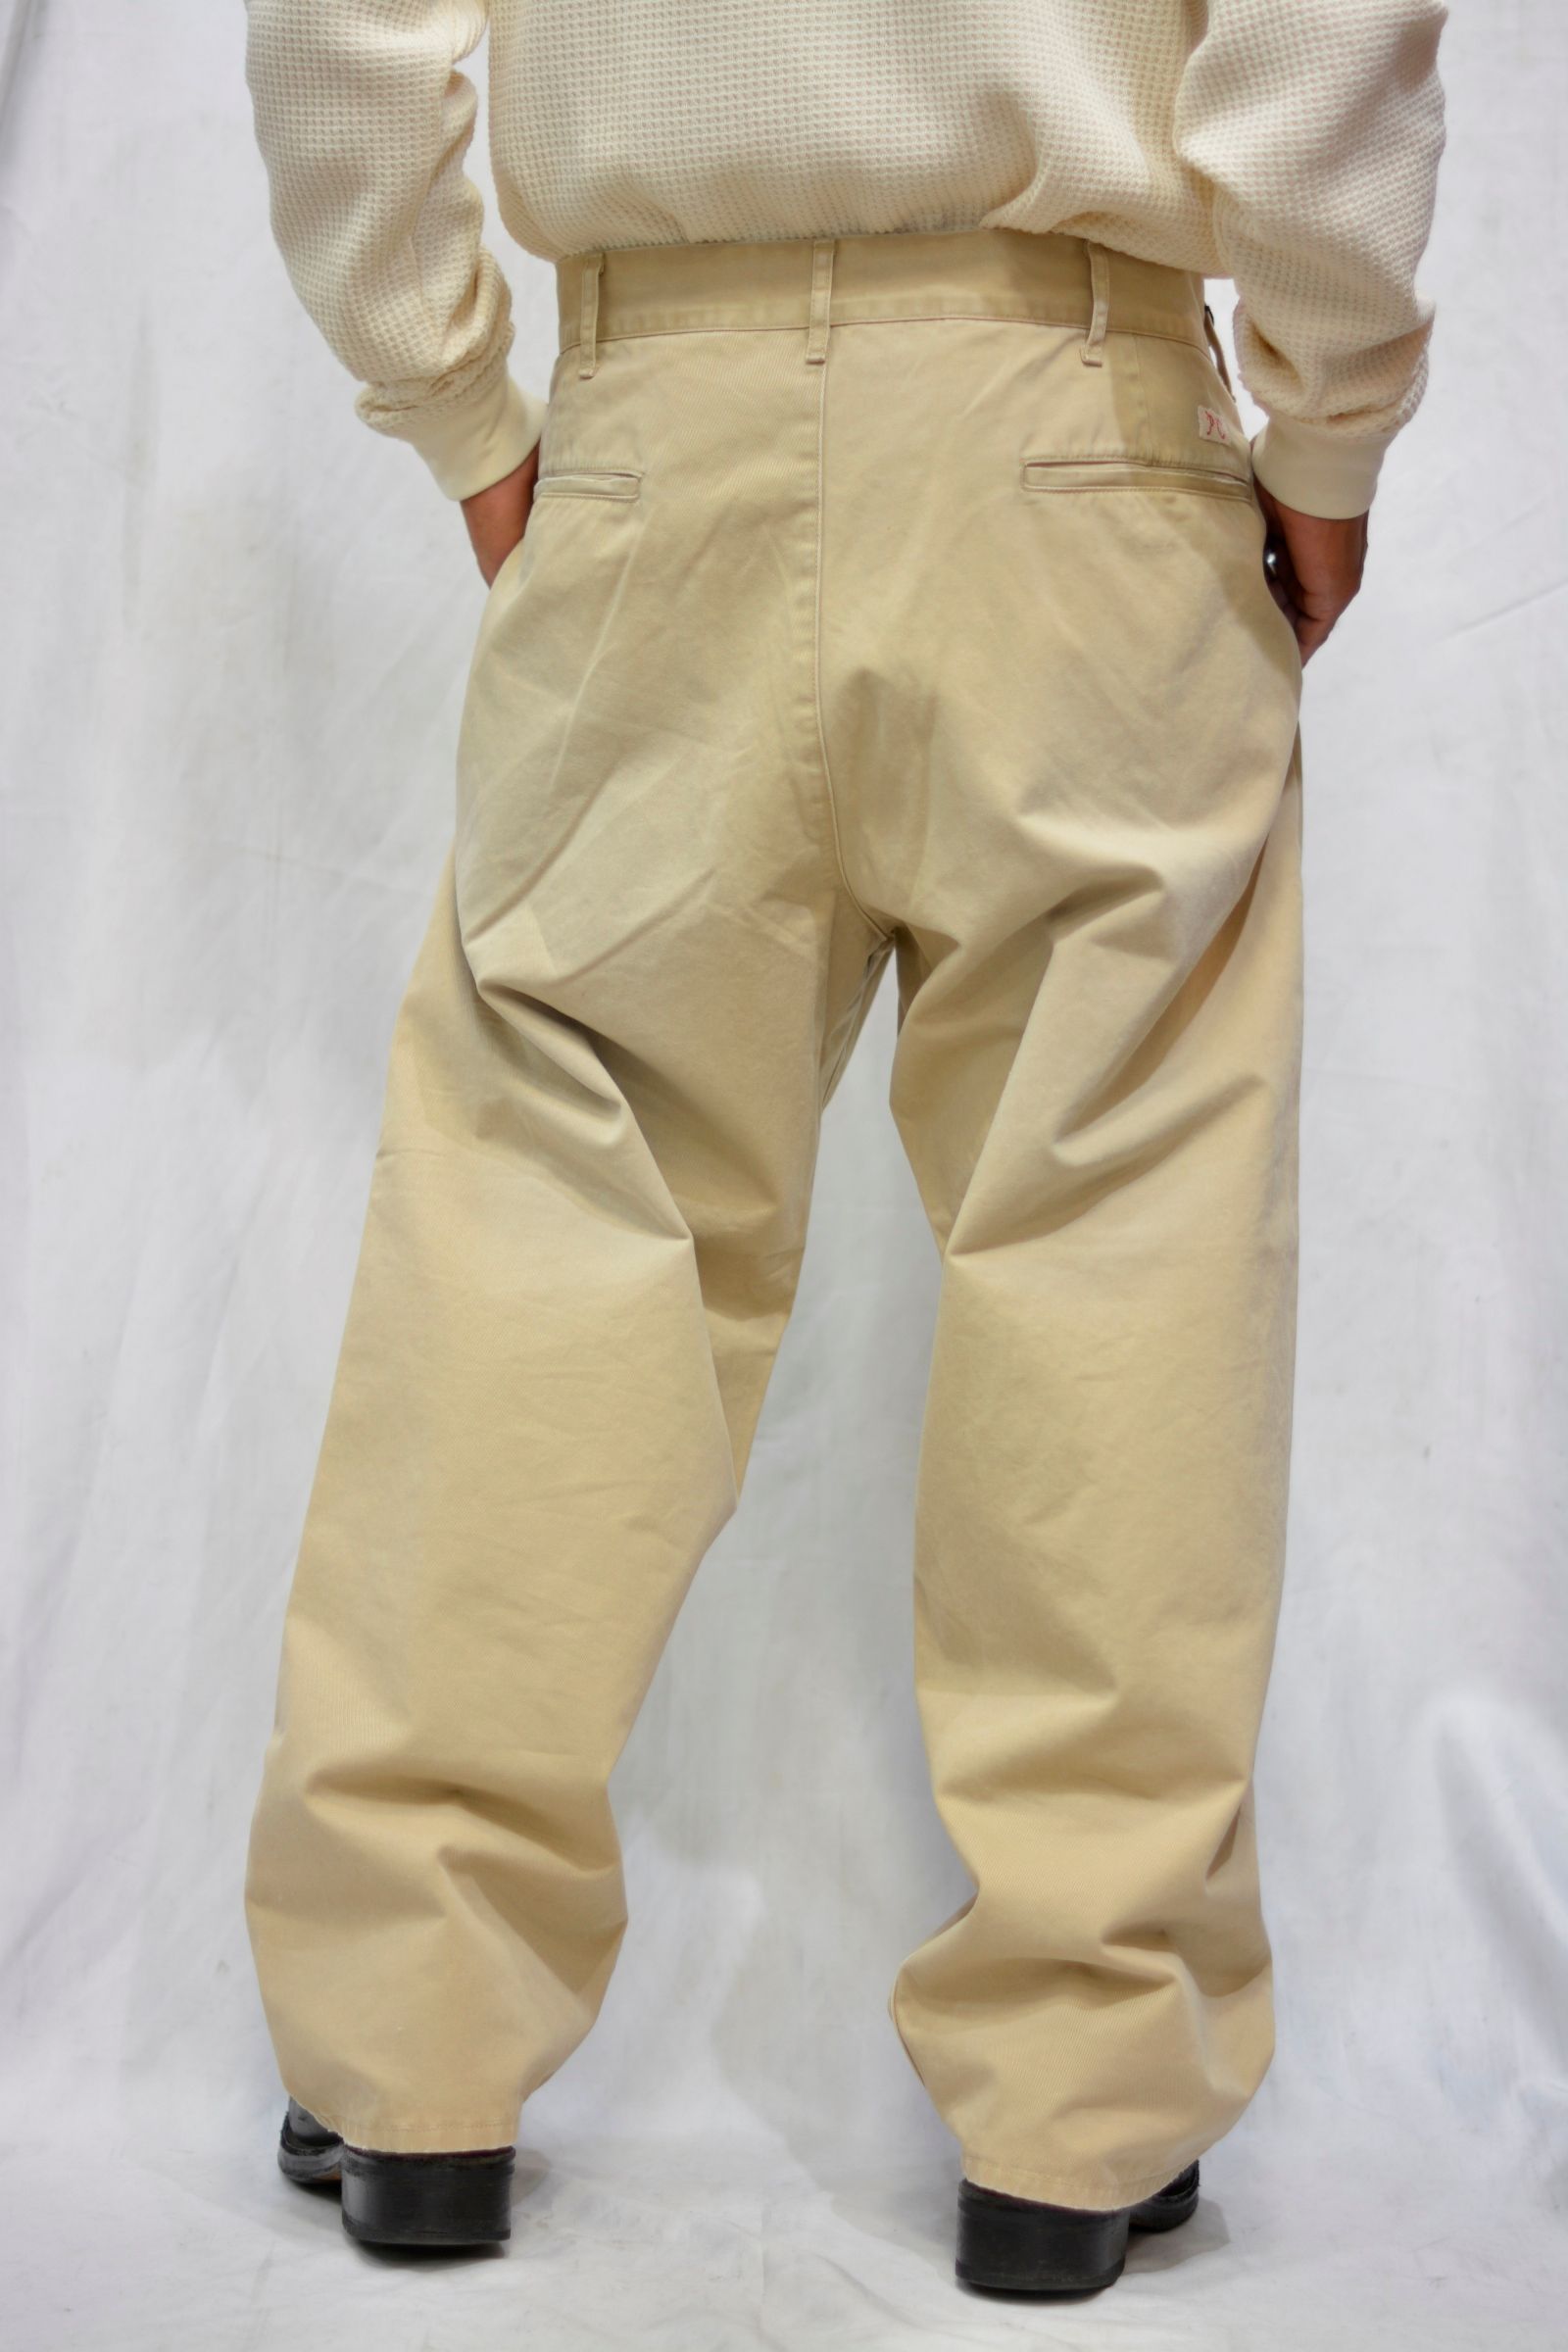 Porter Classic - ”CHINO VINTAGE PANTS | chord online store